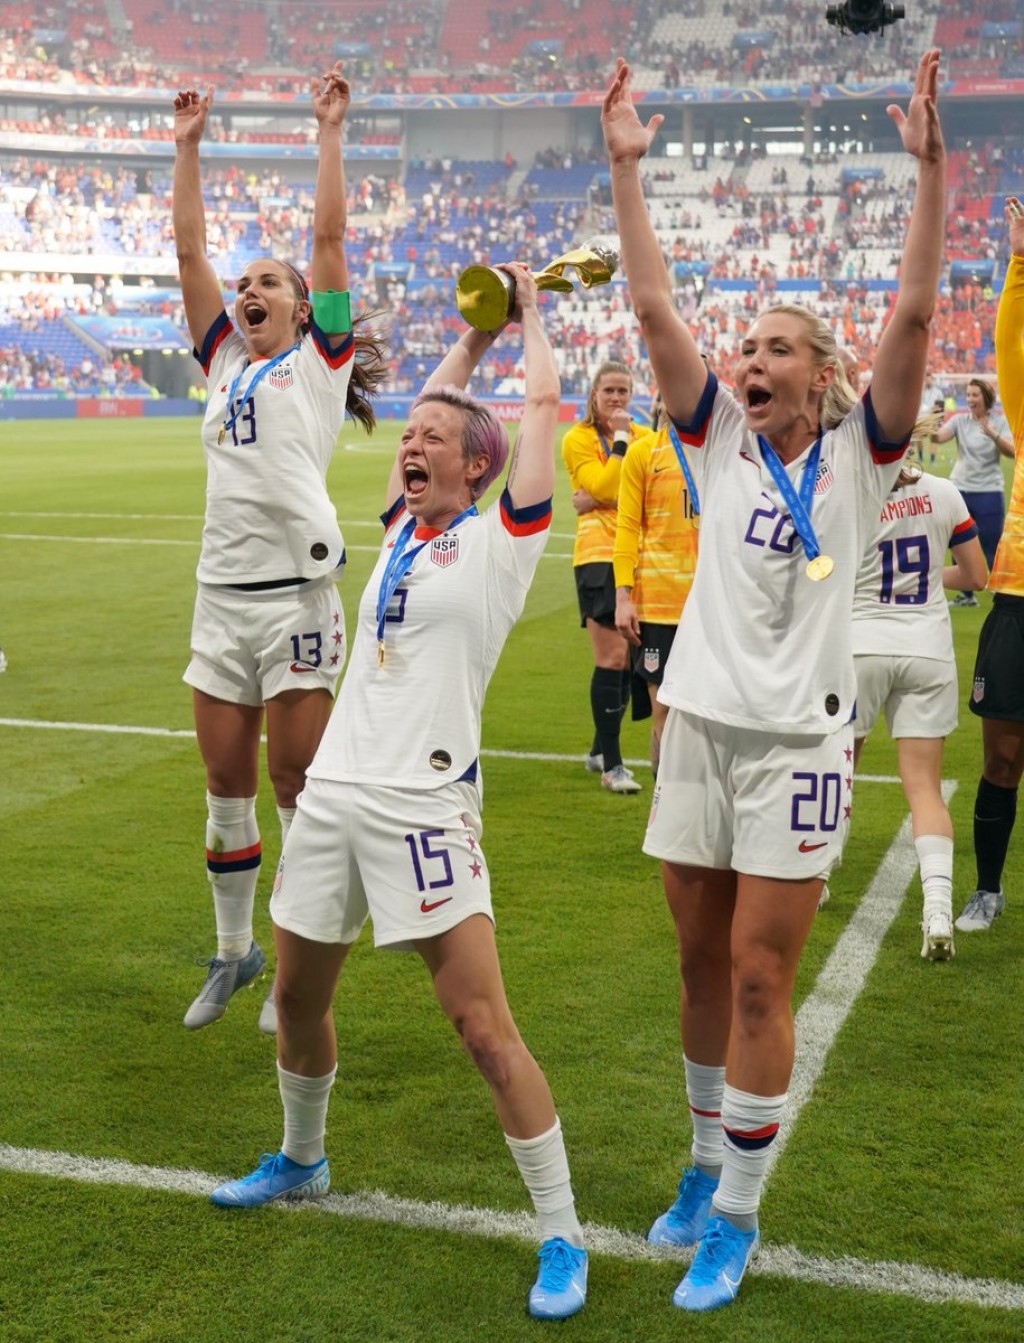 OPINION: The legacy of the 2019 Women’s World Cup